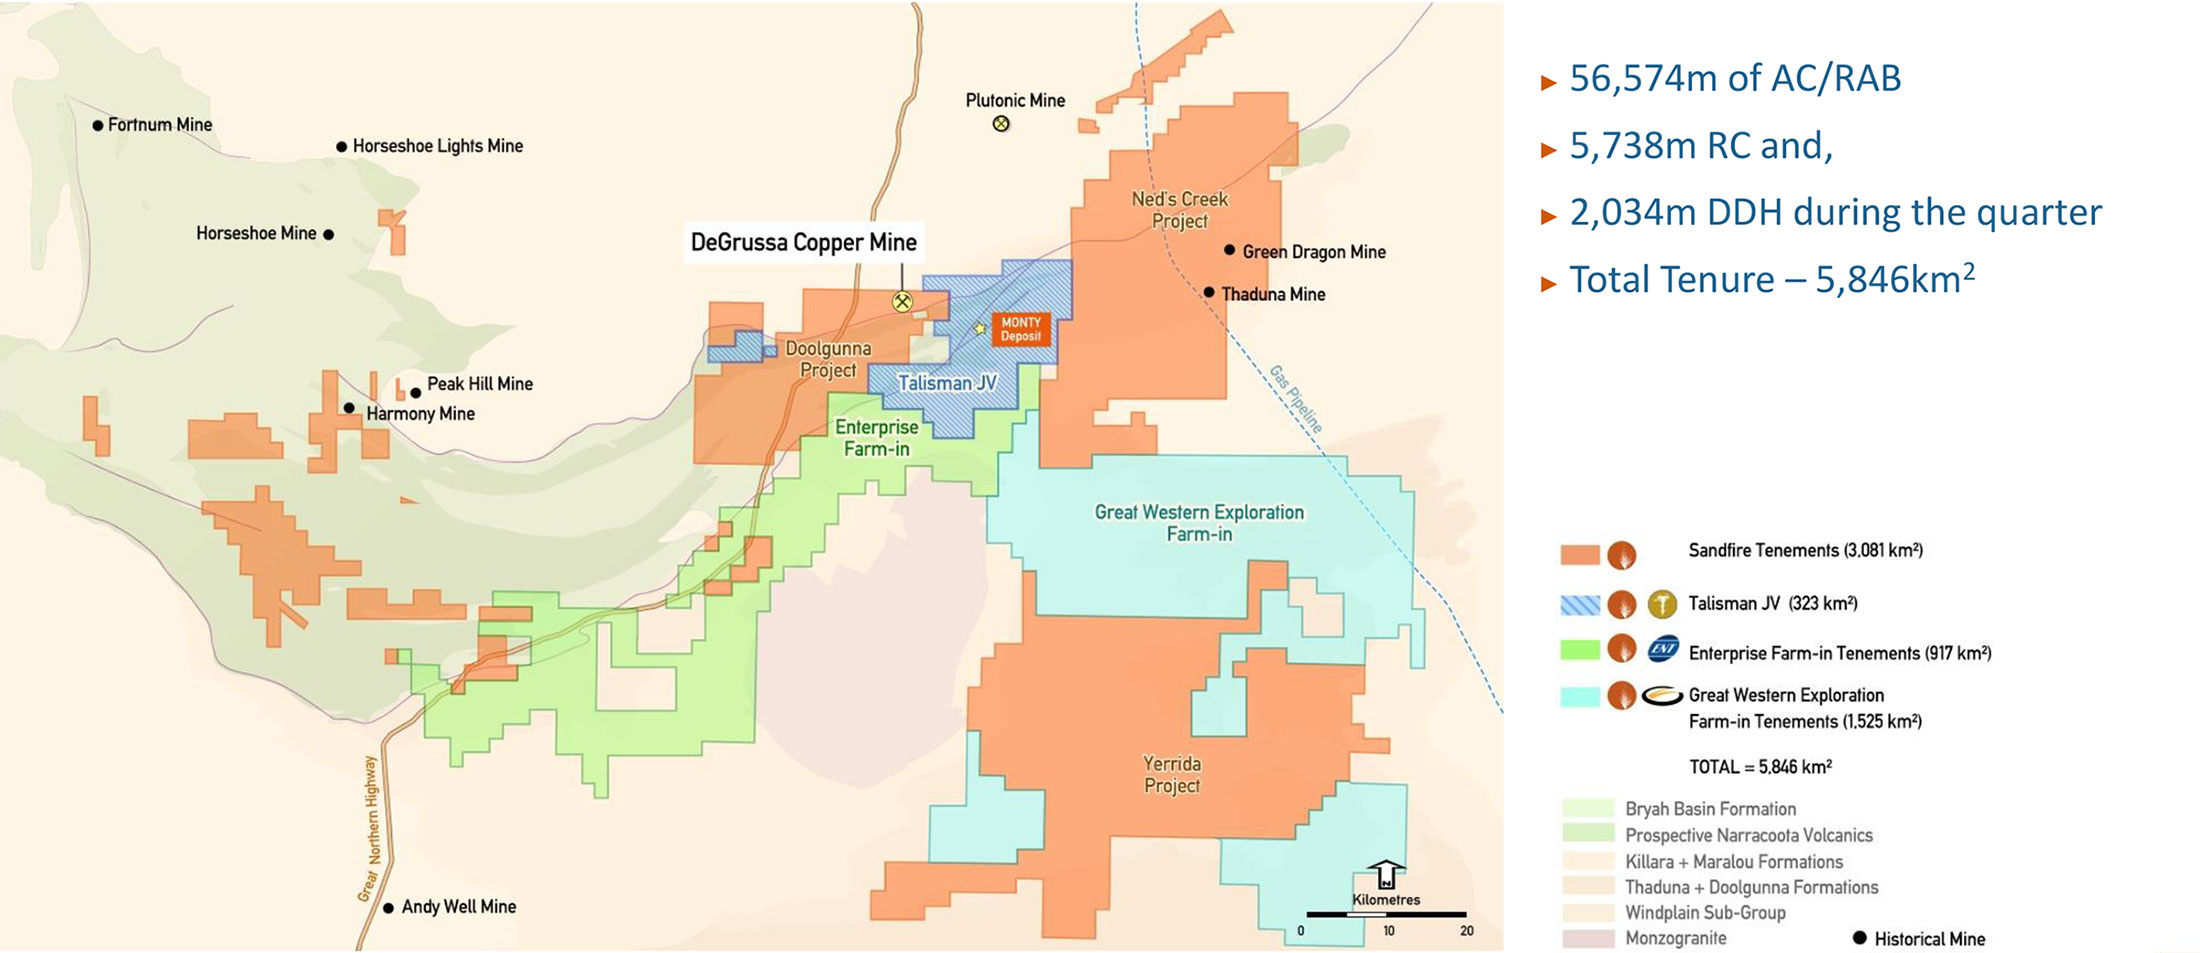  Exploration advancing at multiple prospects within Greater Doolgunna area